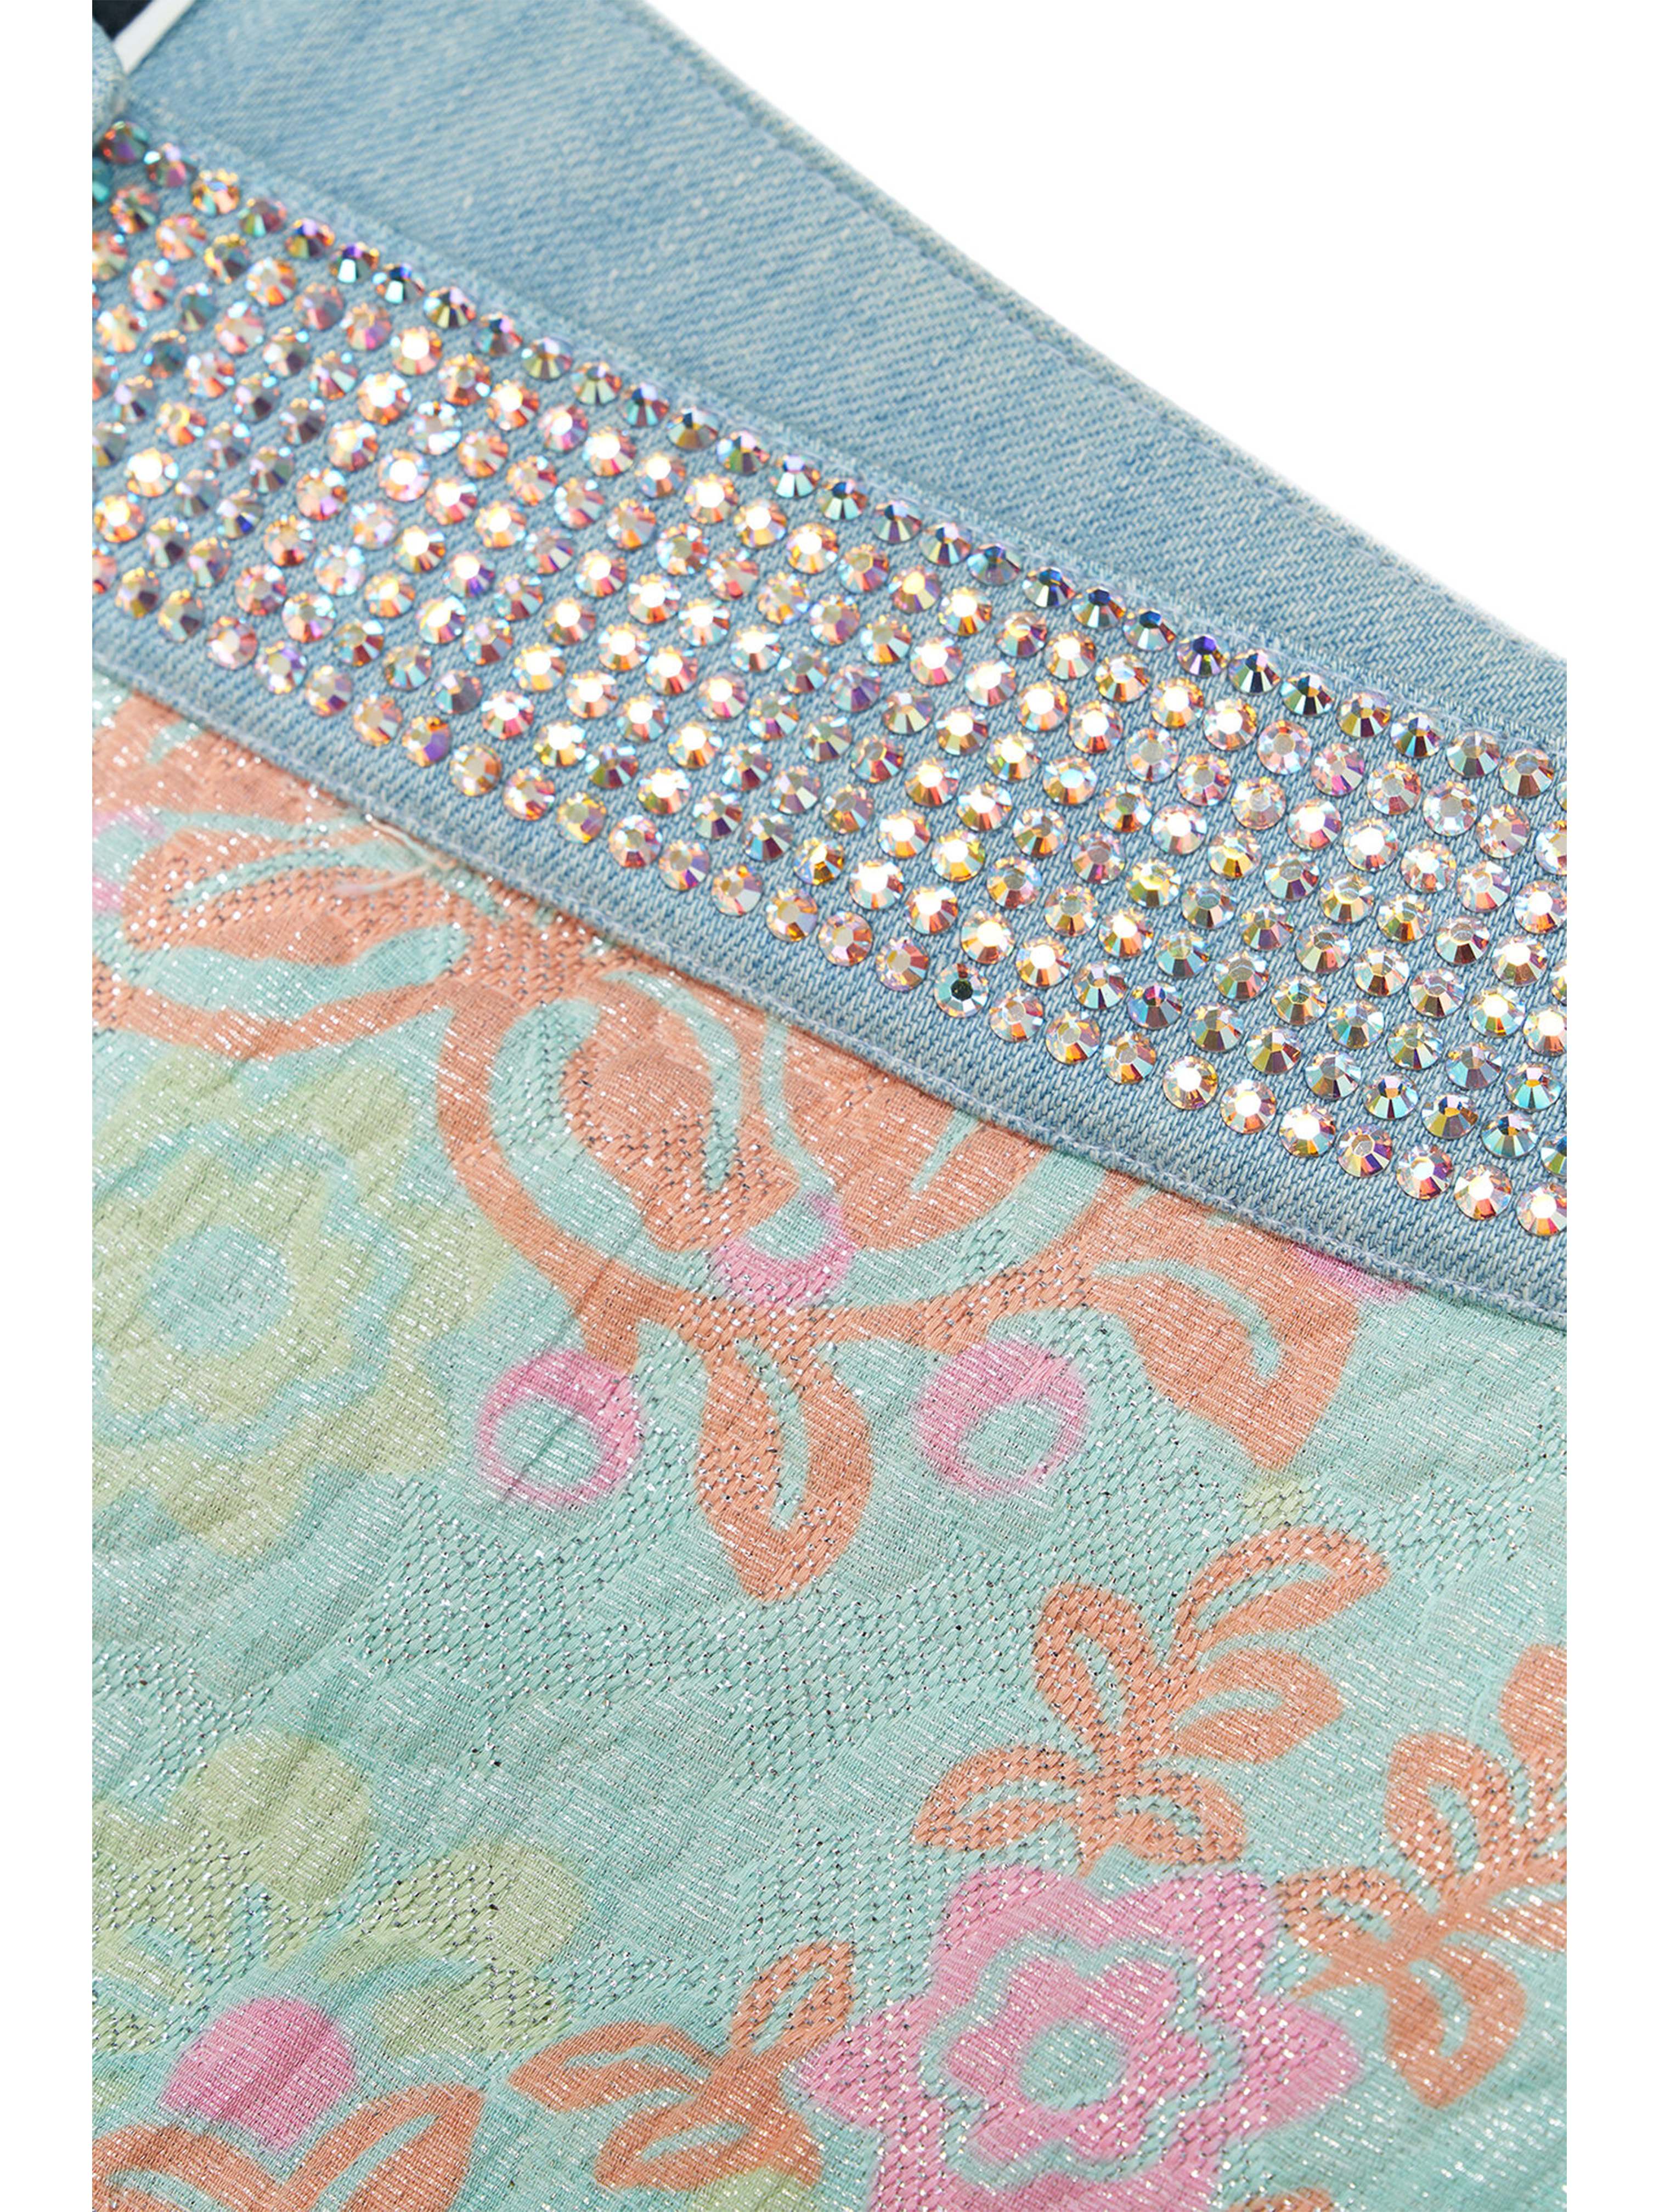 Dolce and Gabbana Spring 2000 Pastel Floral Trousers with Swarovski Crystals